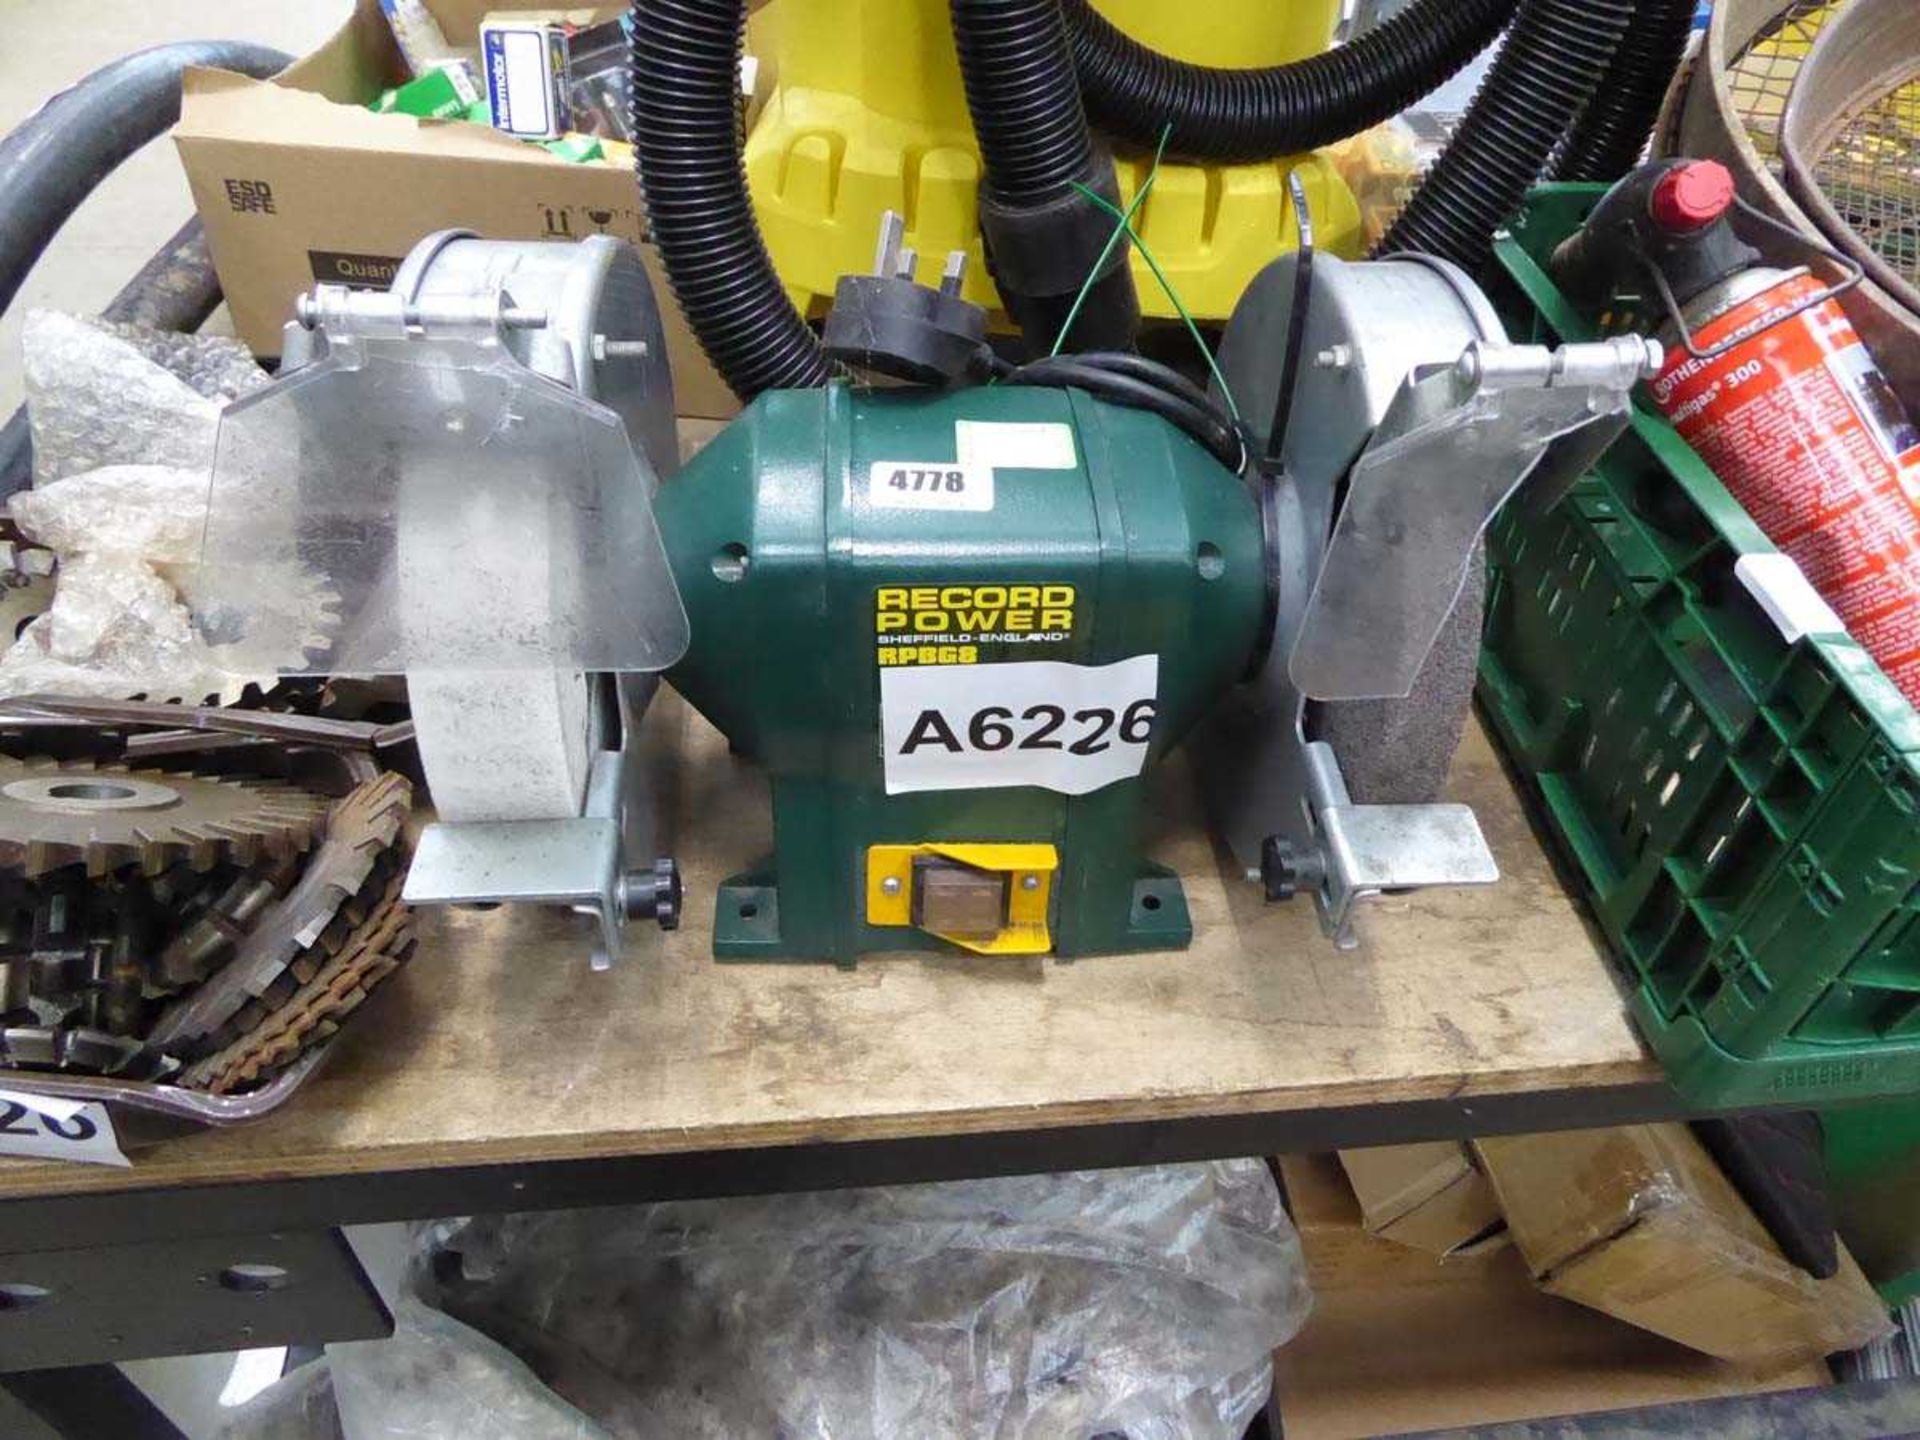 Record Power double ended bench grinder